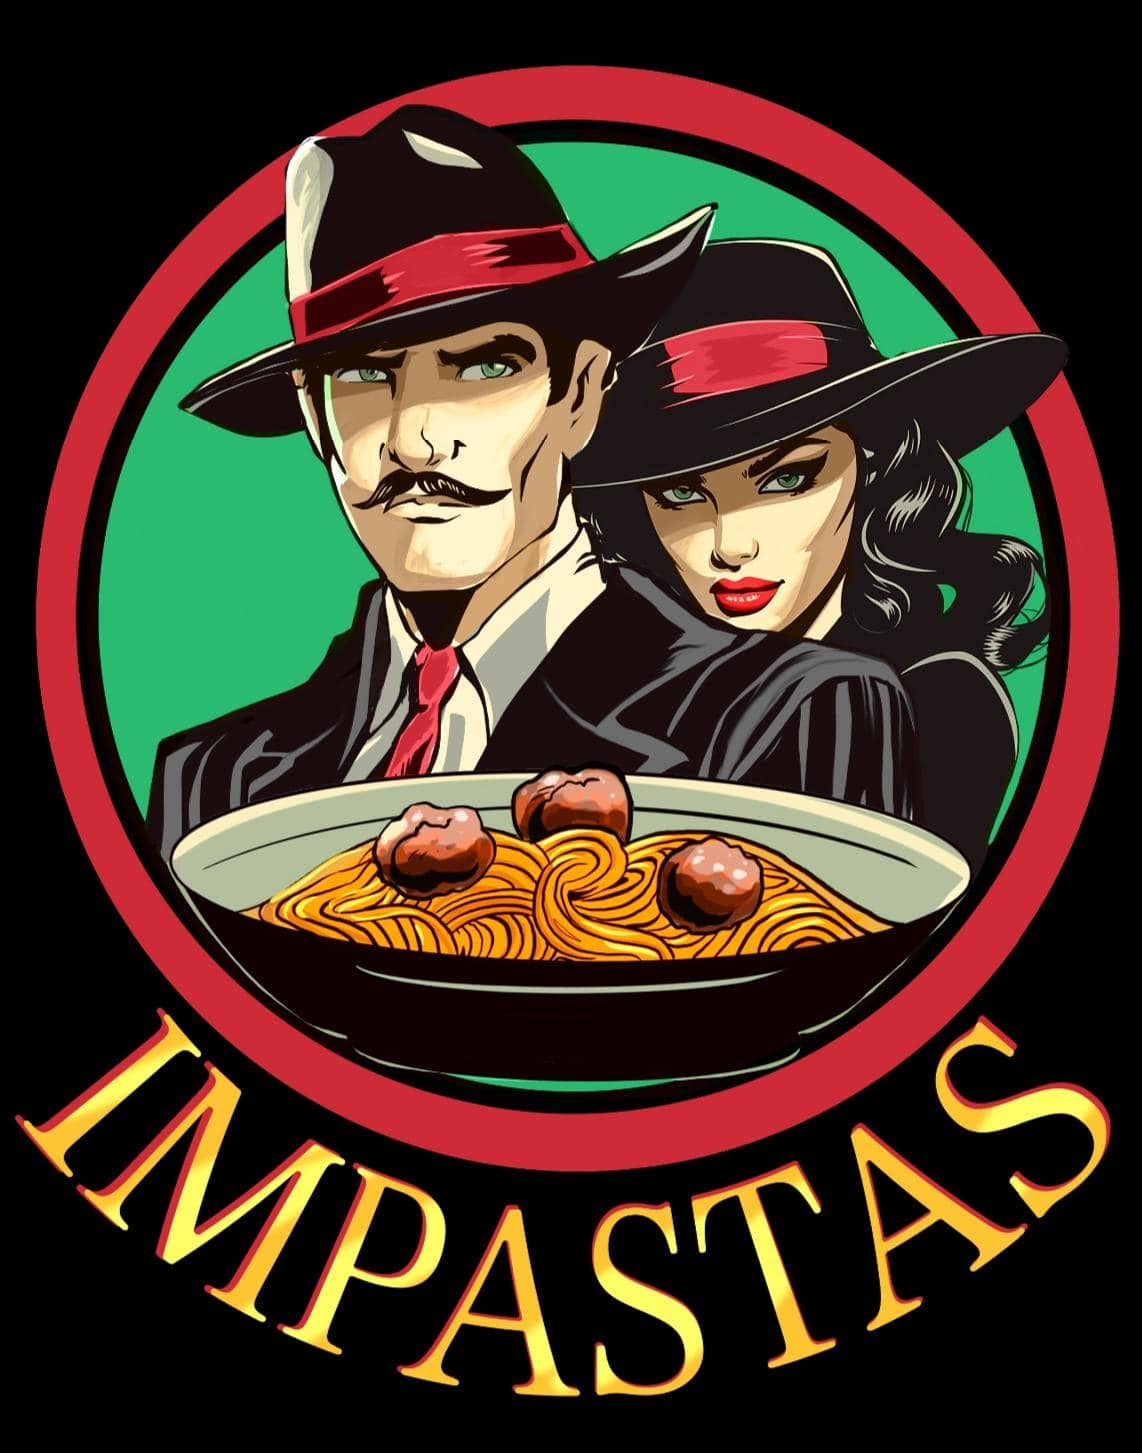 Illustration of a man and woman in 1920s attire with a plate of spaghetti and meatballs. Text below reads "IMPASTAS." The image uses a circular frame with a red rim and a green background.